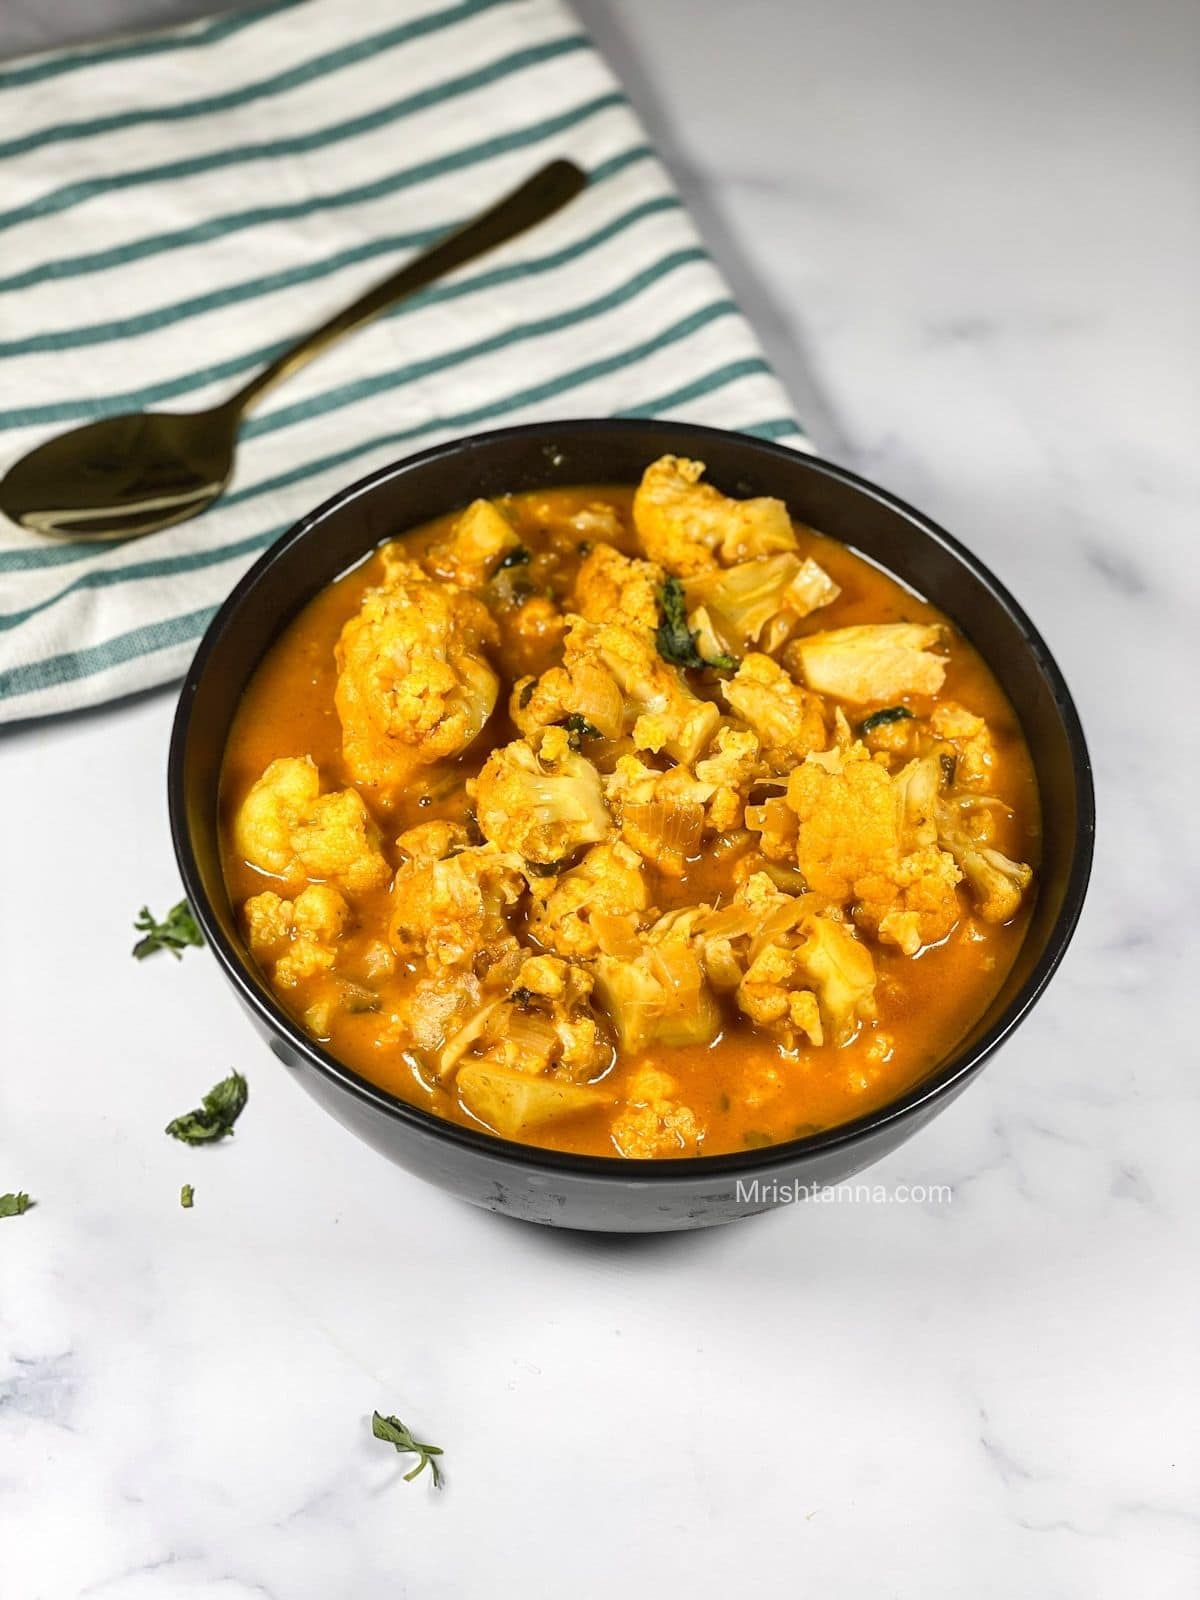 A bowl of cauliflower curry is on the table along with a golden spoon.